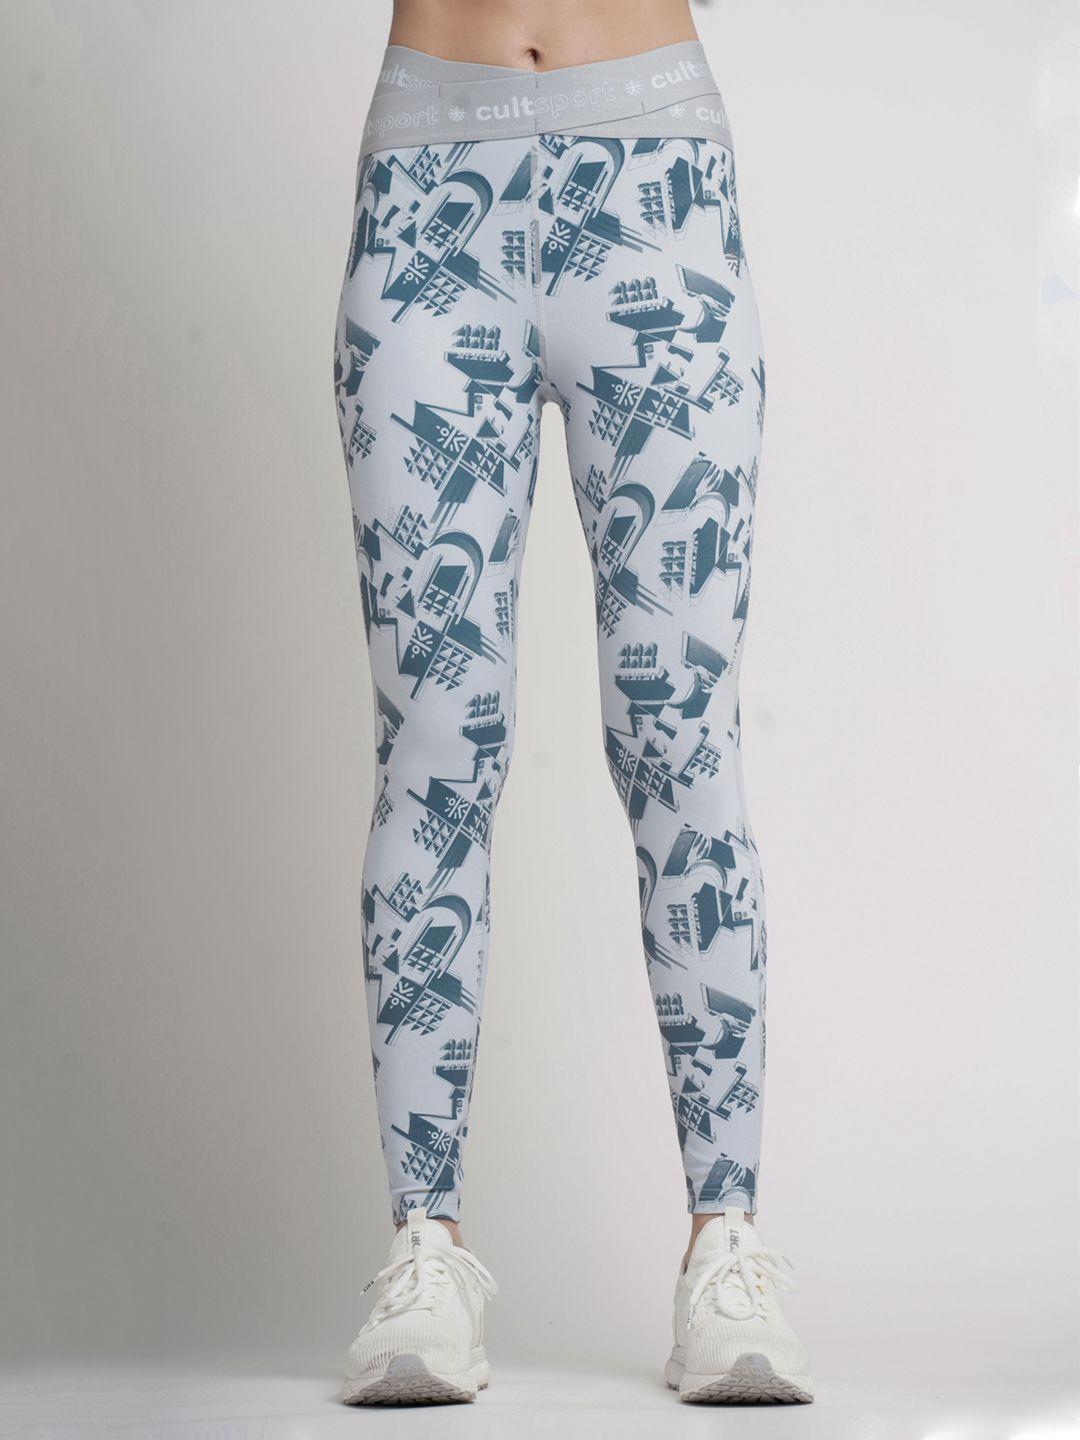 cultsport women white & grey printed tights